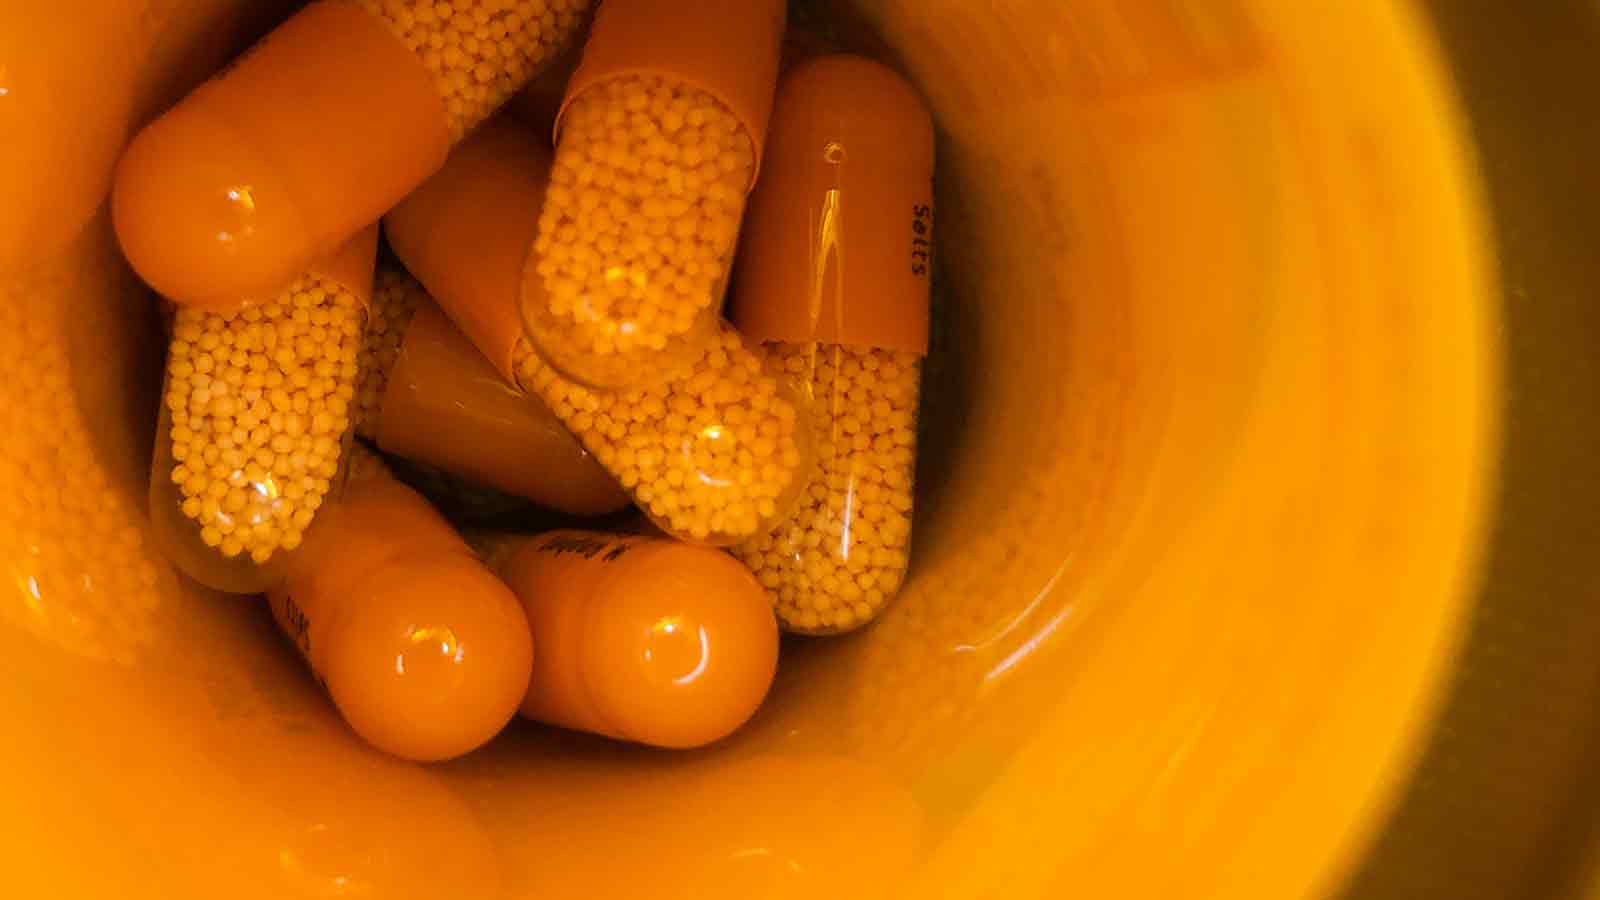 In appropriate doses, Adderall is a useful treatment for ADHD and Narcolepsy.